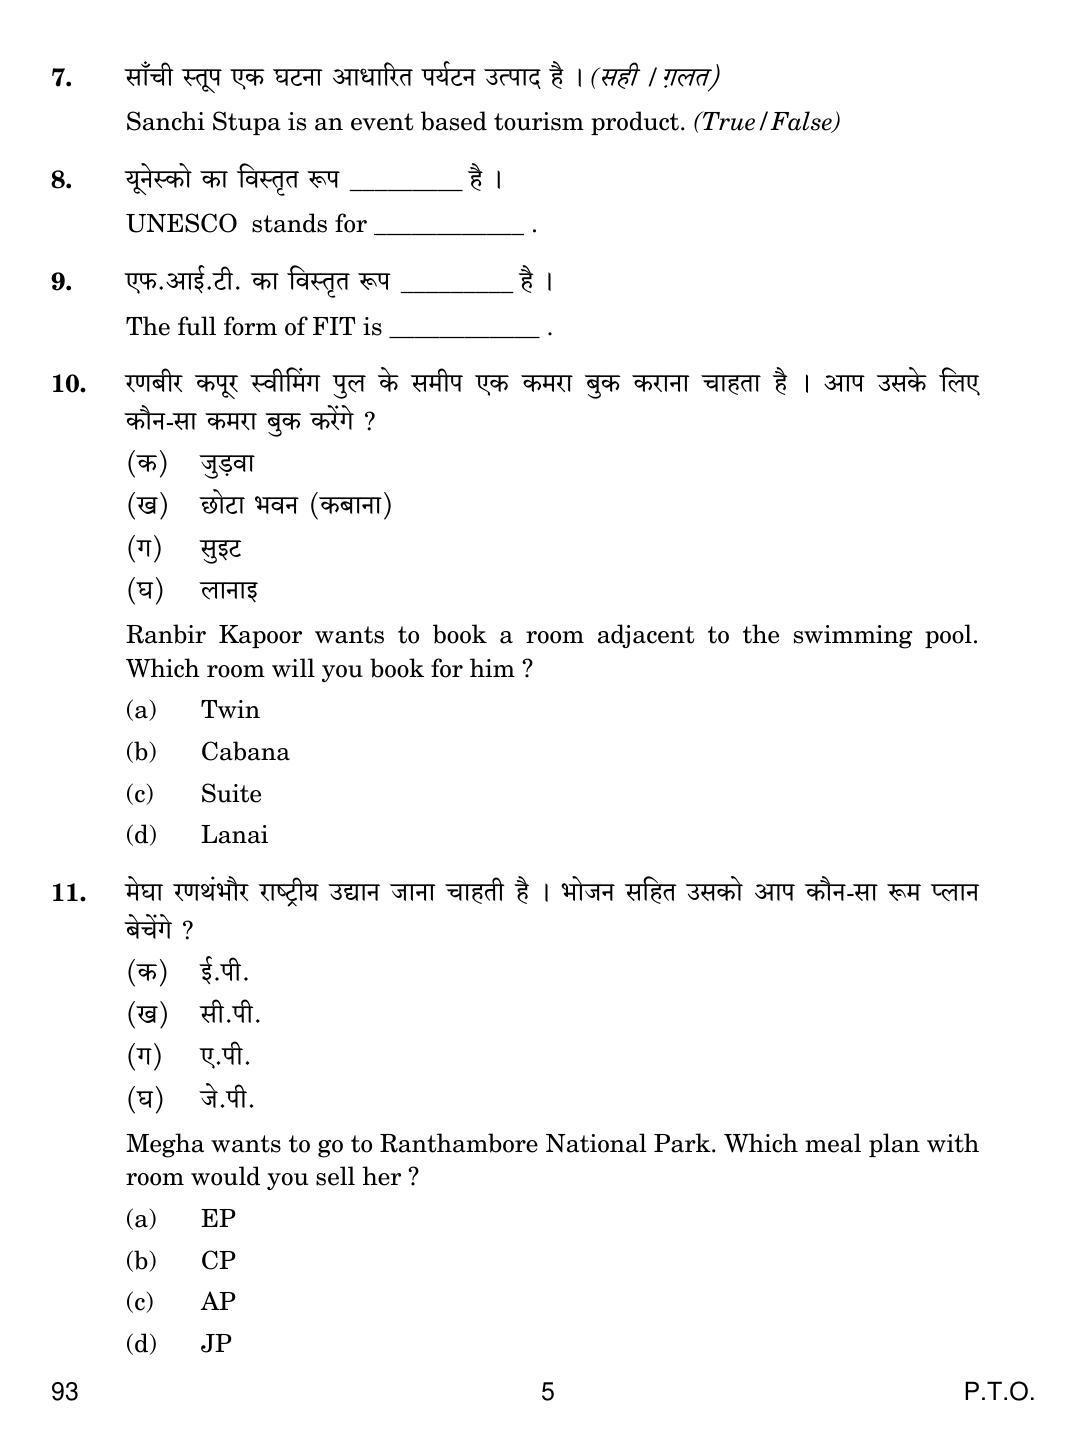 CBSE Class 10 93 INTRODUCTION TO TOURISM 2019 Question Paper - Page 5